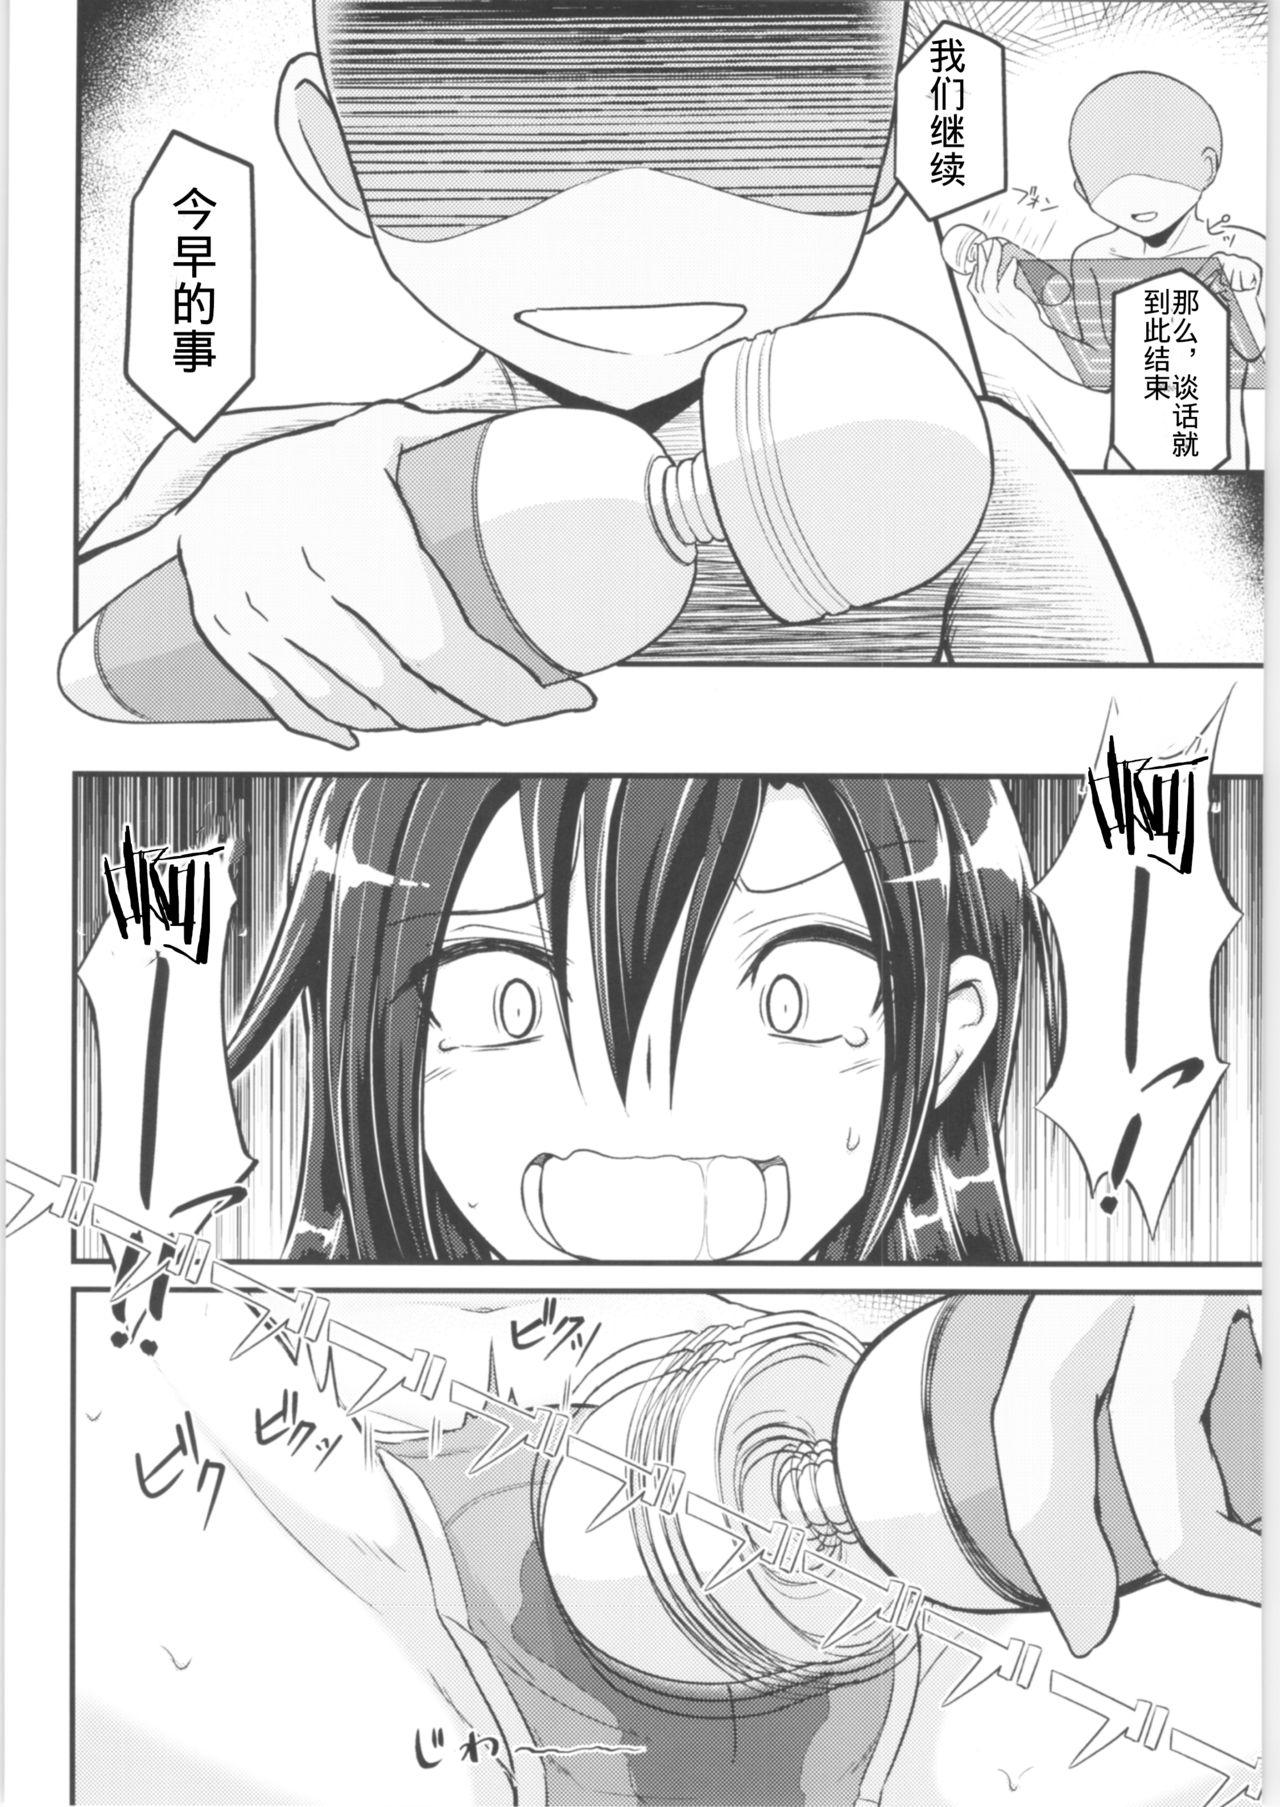 Hermosa Kiriko Route Another #01 - Sword art online Analfuck - Page 9